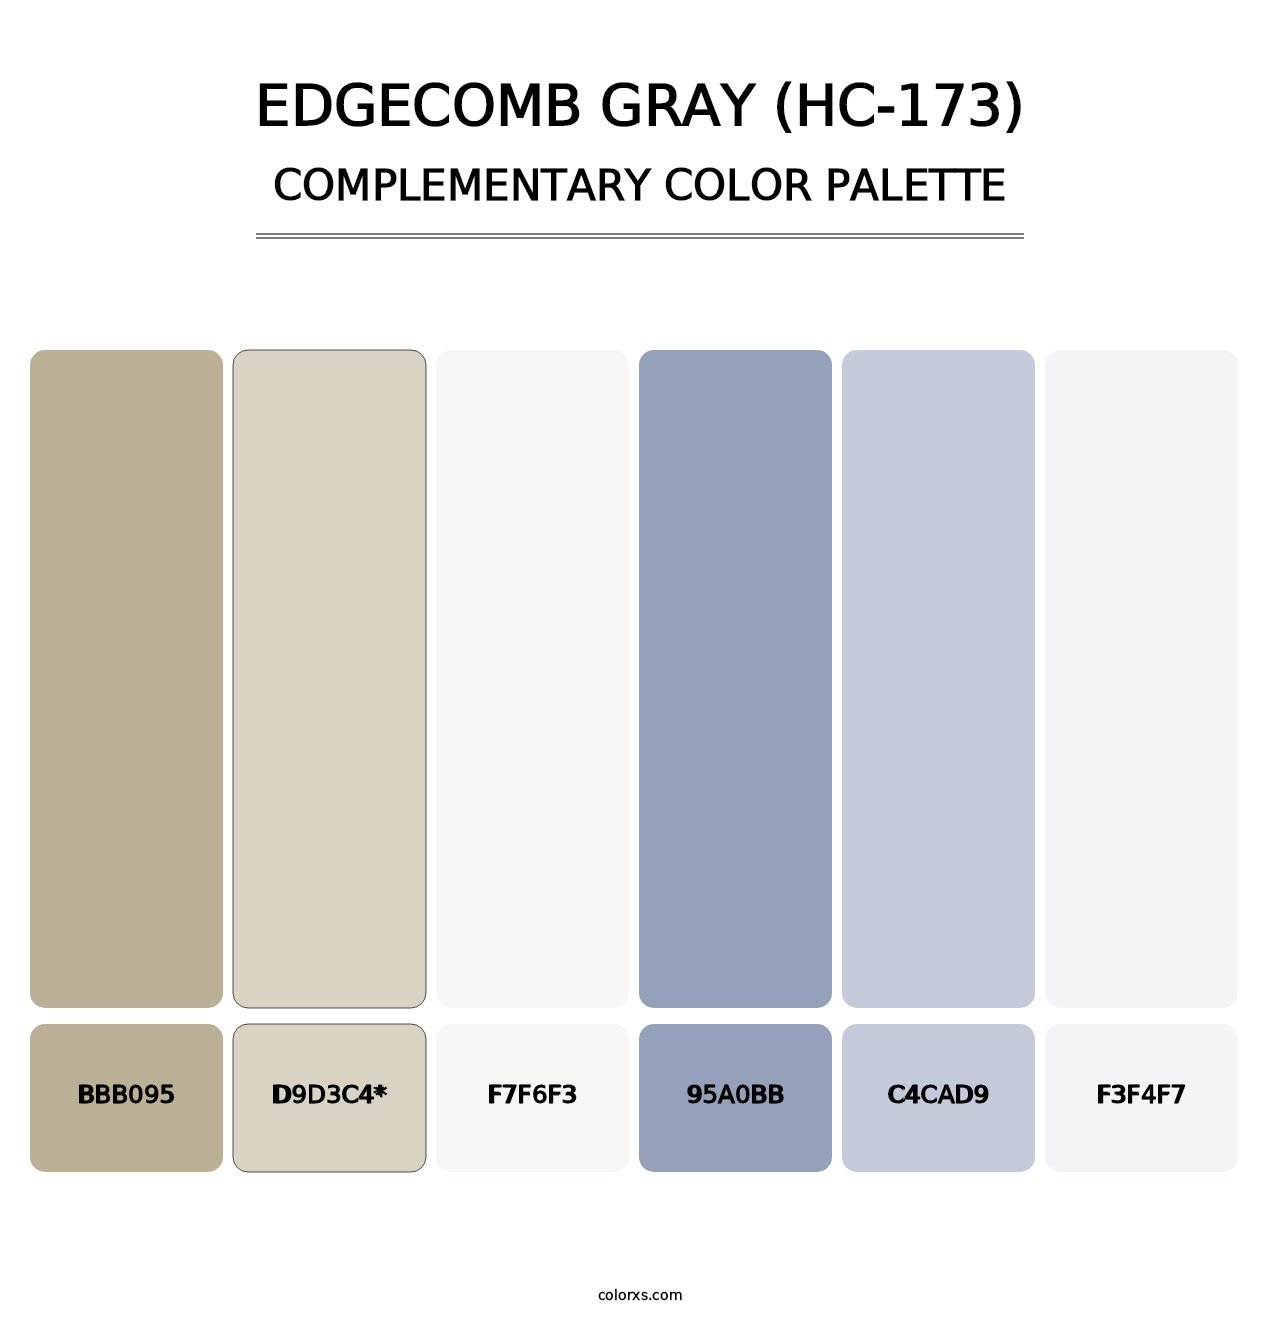 Edgecomb Gray (HC-173) - Complementary Color Palette